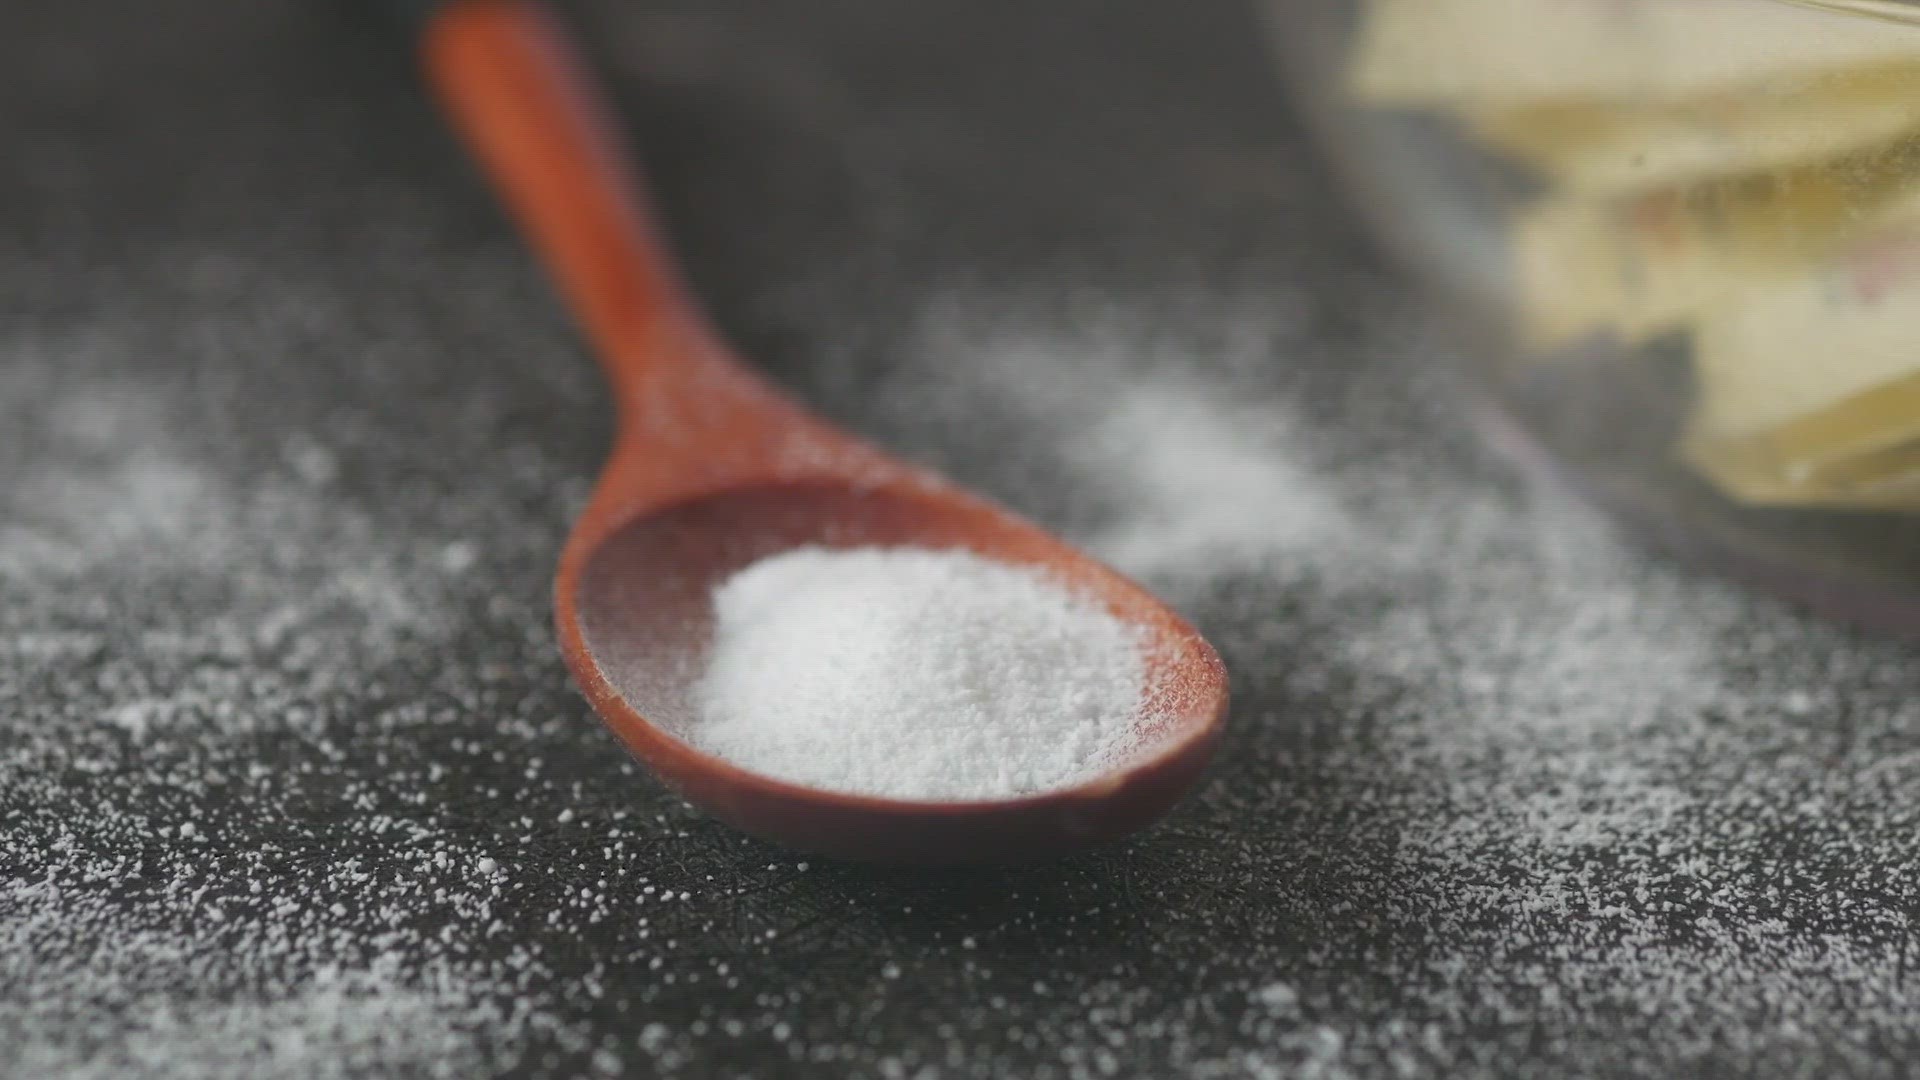 A new study published by Cleveland Clinic links Erythritol, a common artificial sweetener, to heart disease.